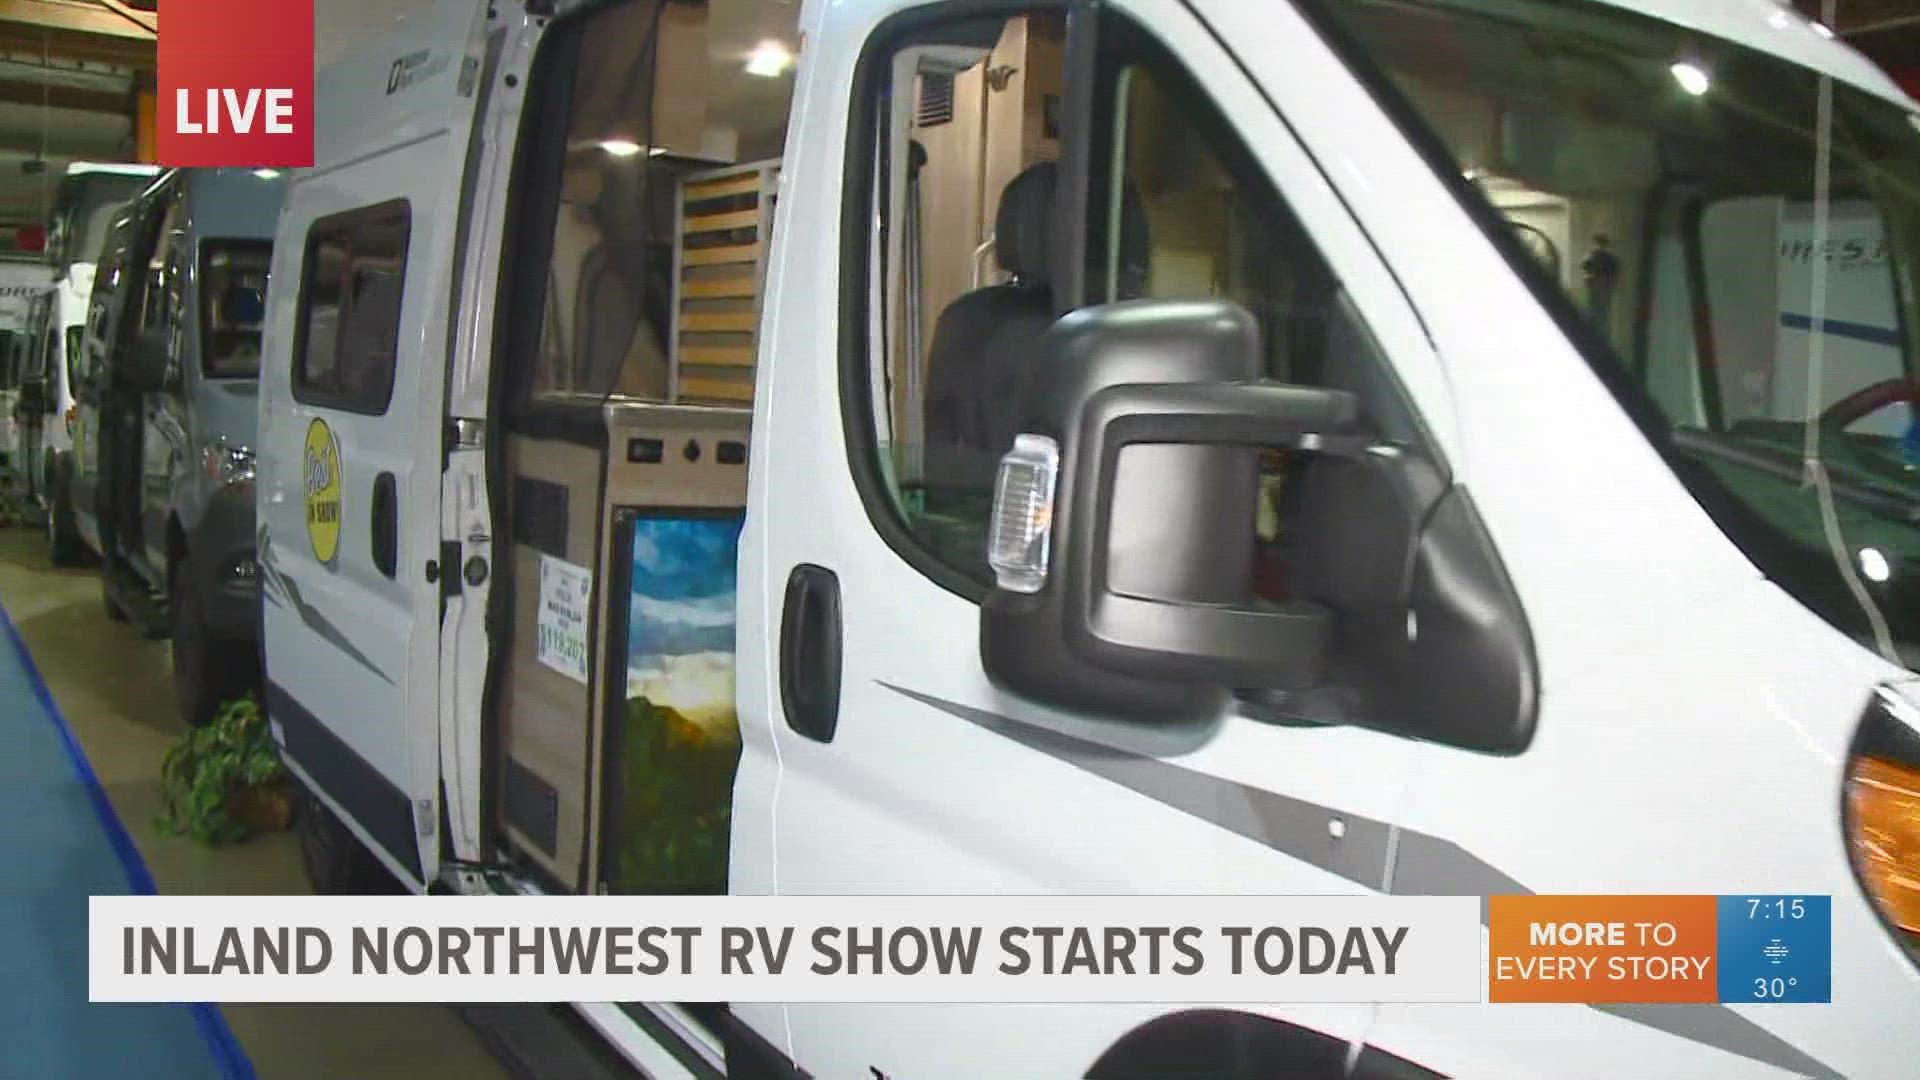 For 35 years the RV show has been making stops, showing off new RV models around the Inland Northwest.